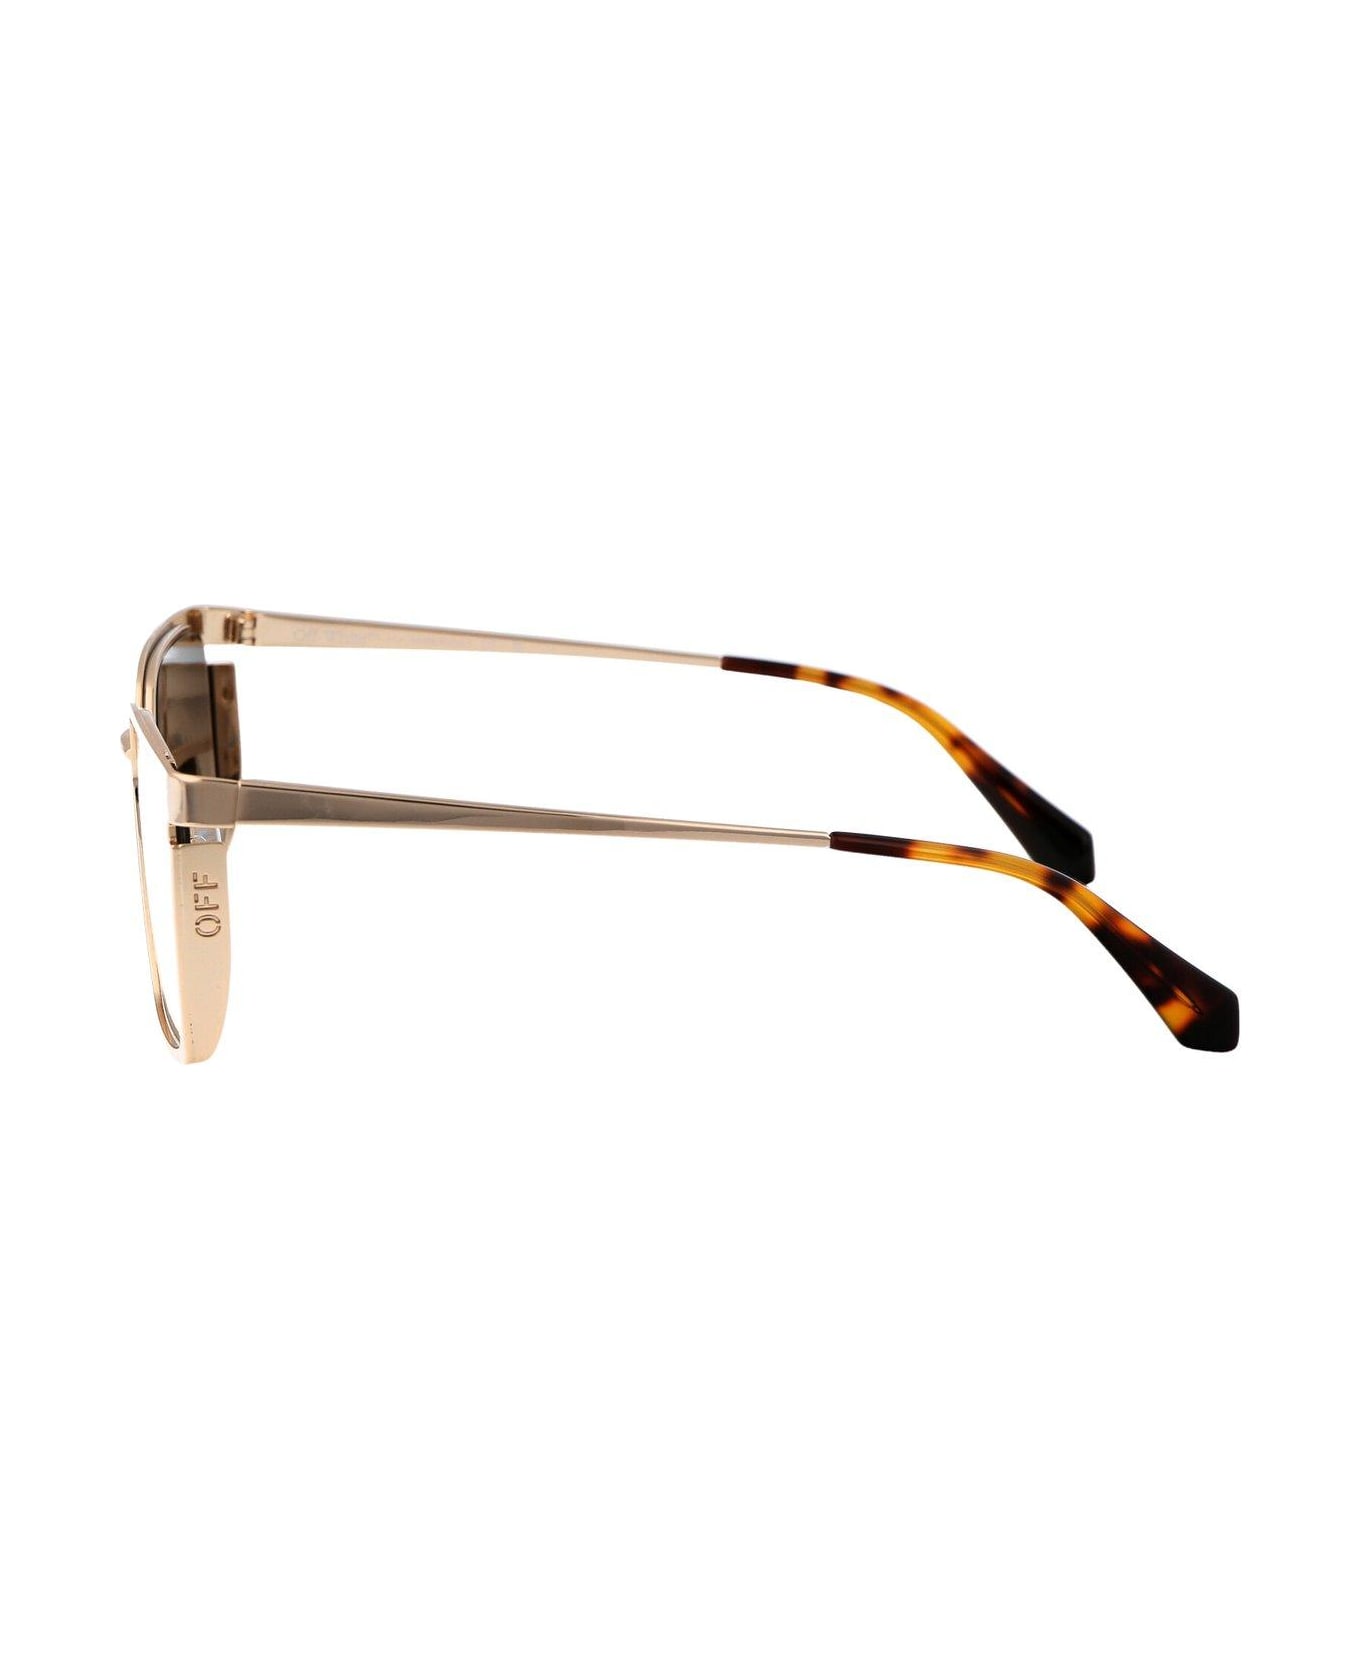 Off-White Yoder Sunglasses - 7676 GOLD GOLD サングラス